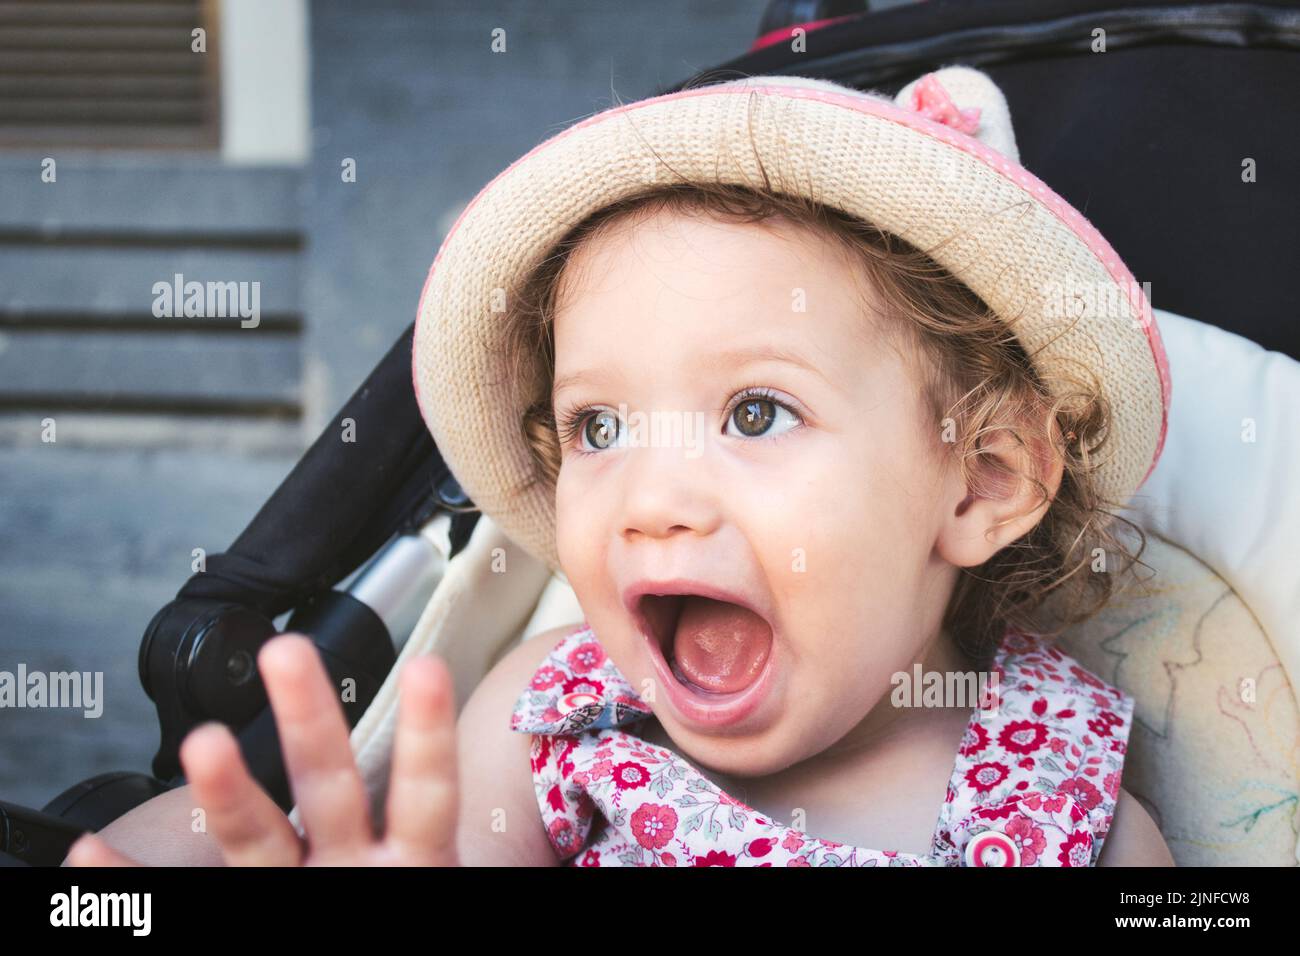 A cute white Caucasian little girl wearing a round straw summer hat looking surprised and happy Stock Photo